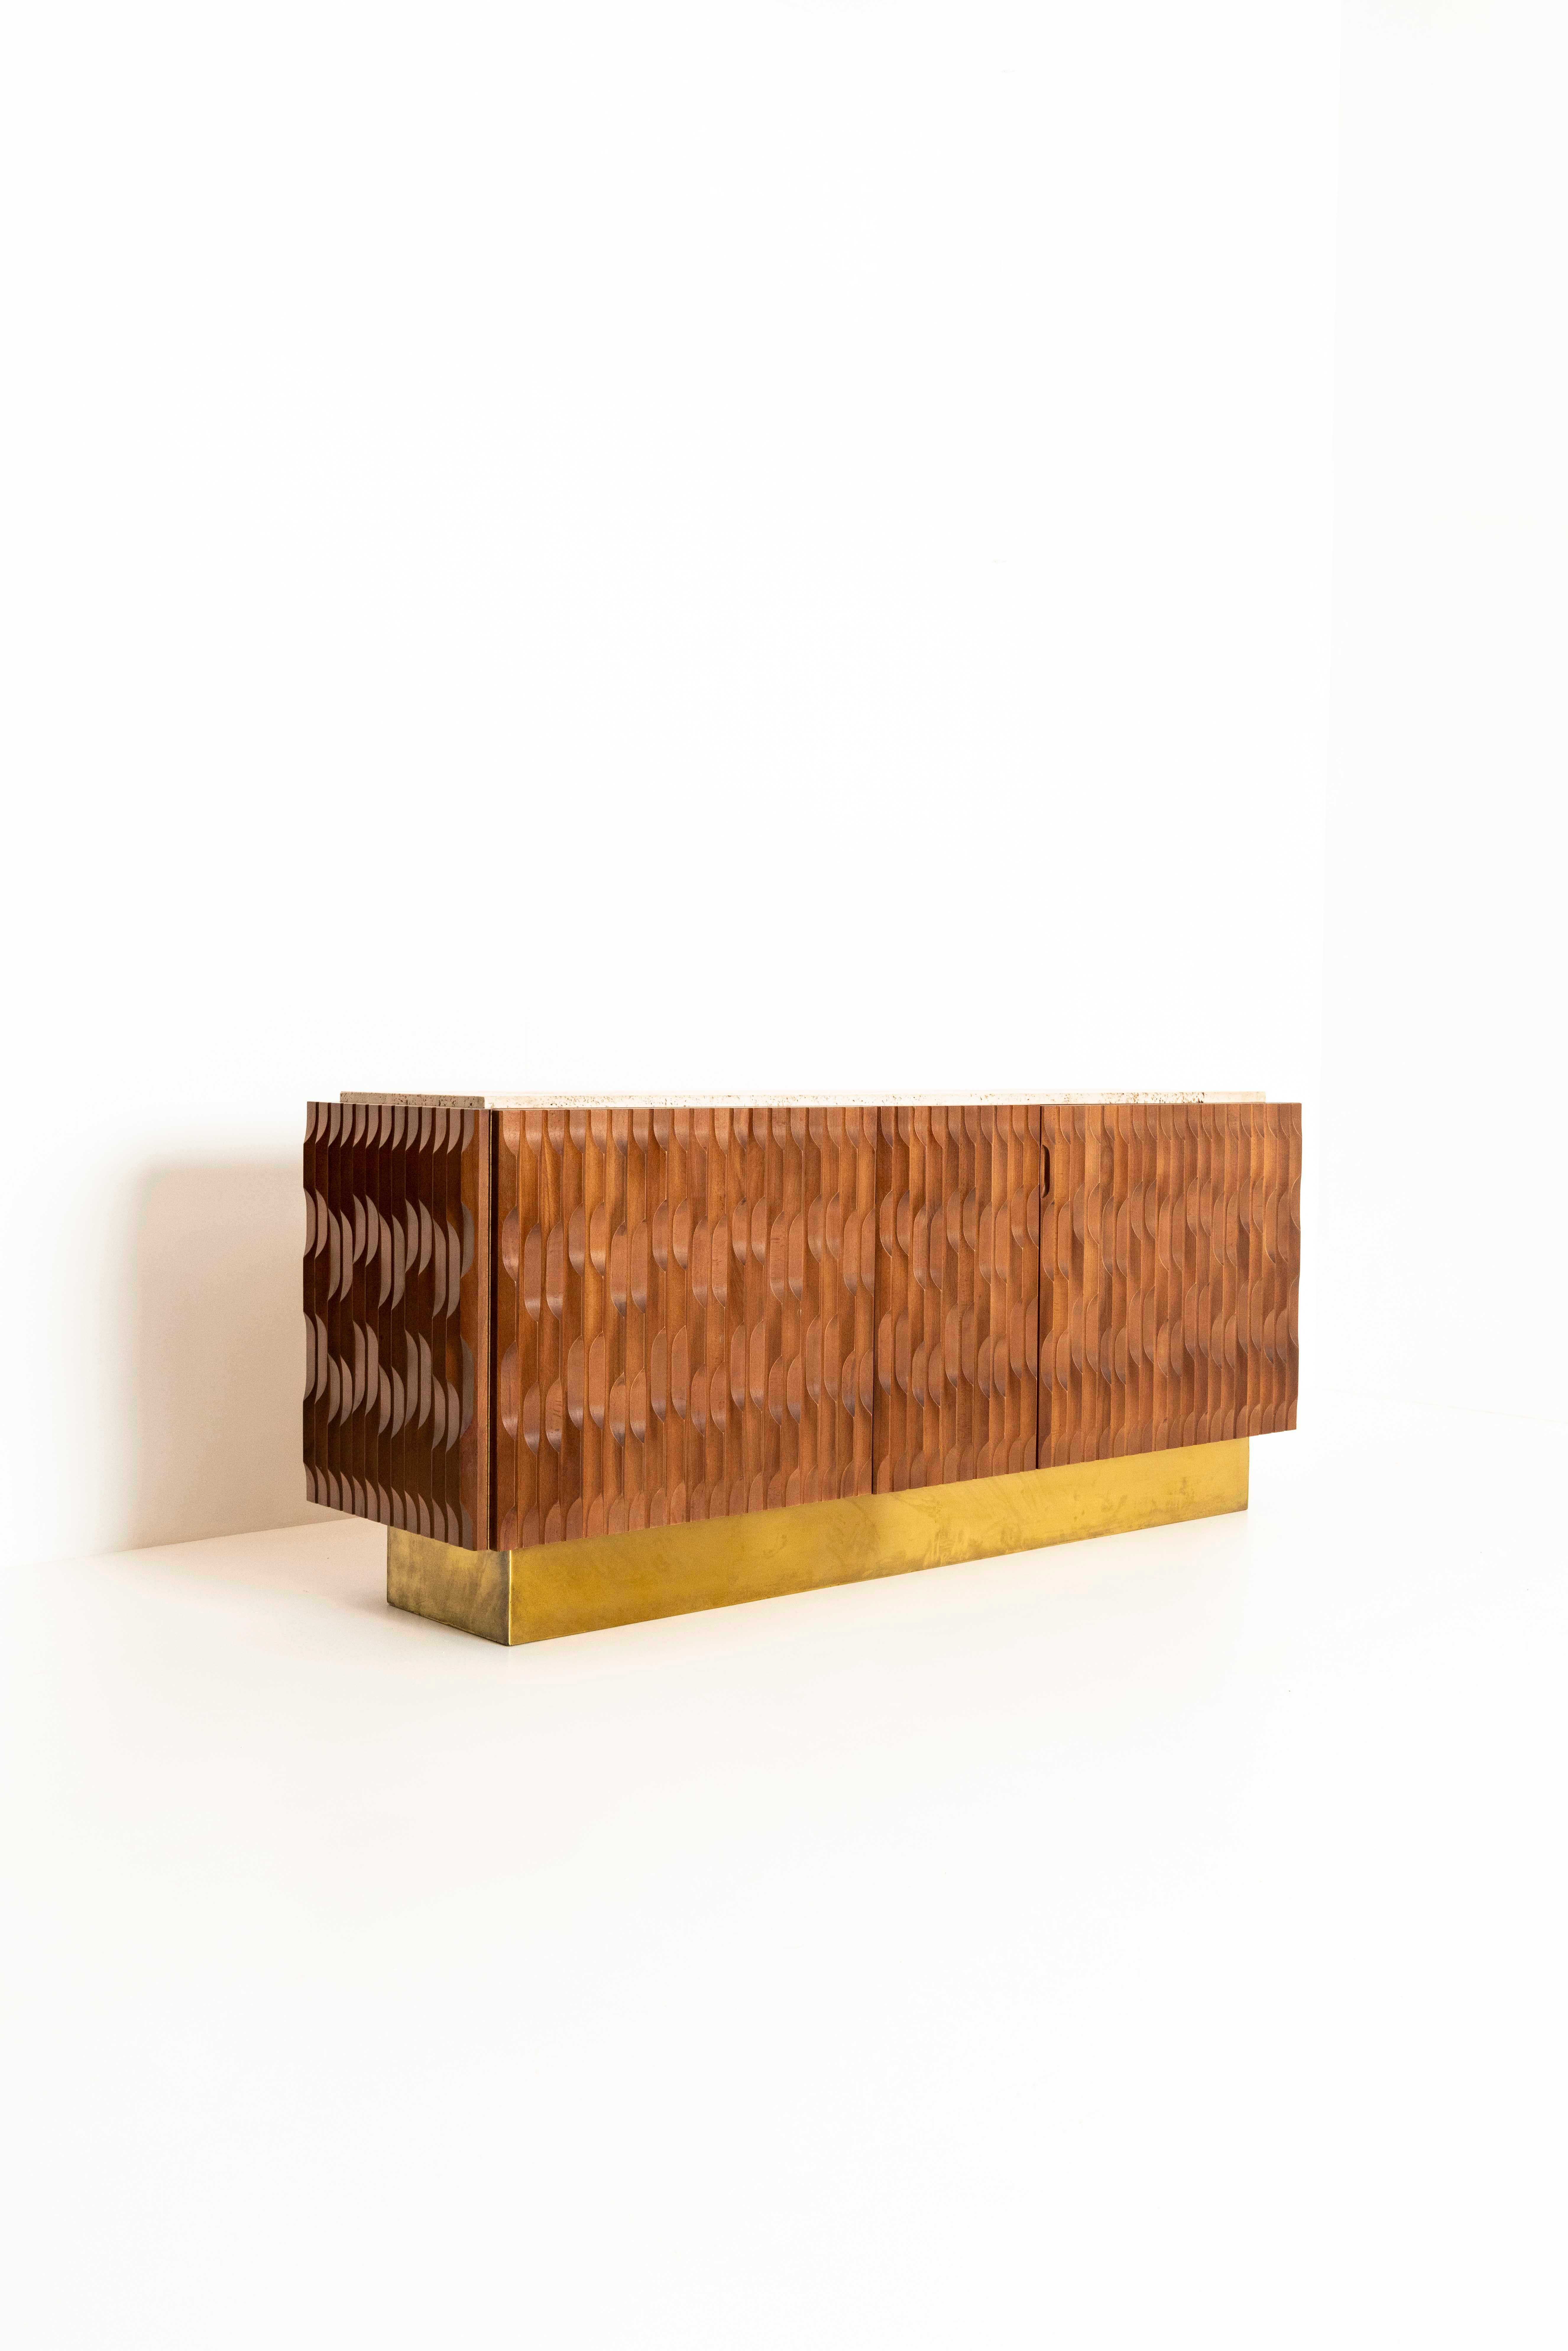 Mid-Century Modern Italian Brutalist Sideboard with Wood, Brass and Travertine, 1970s For Sale